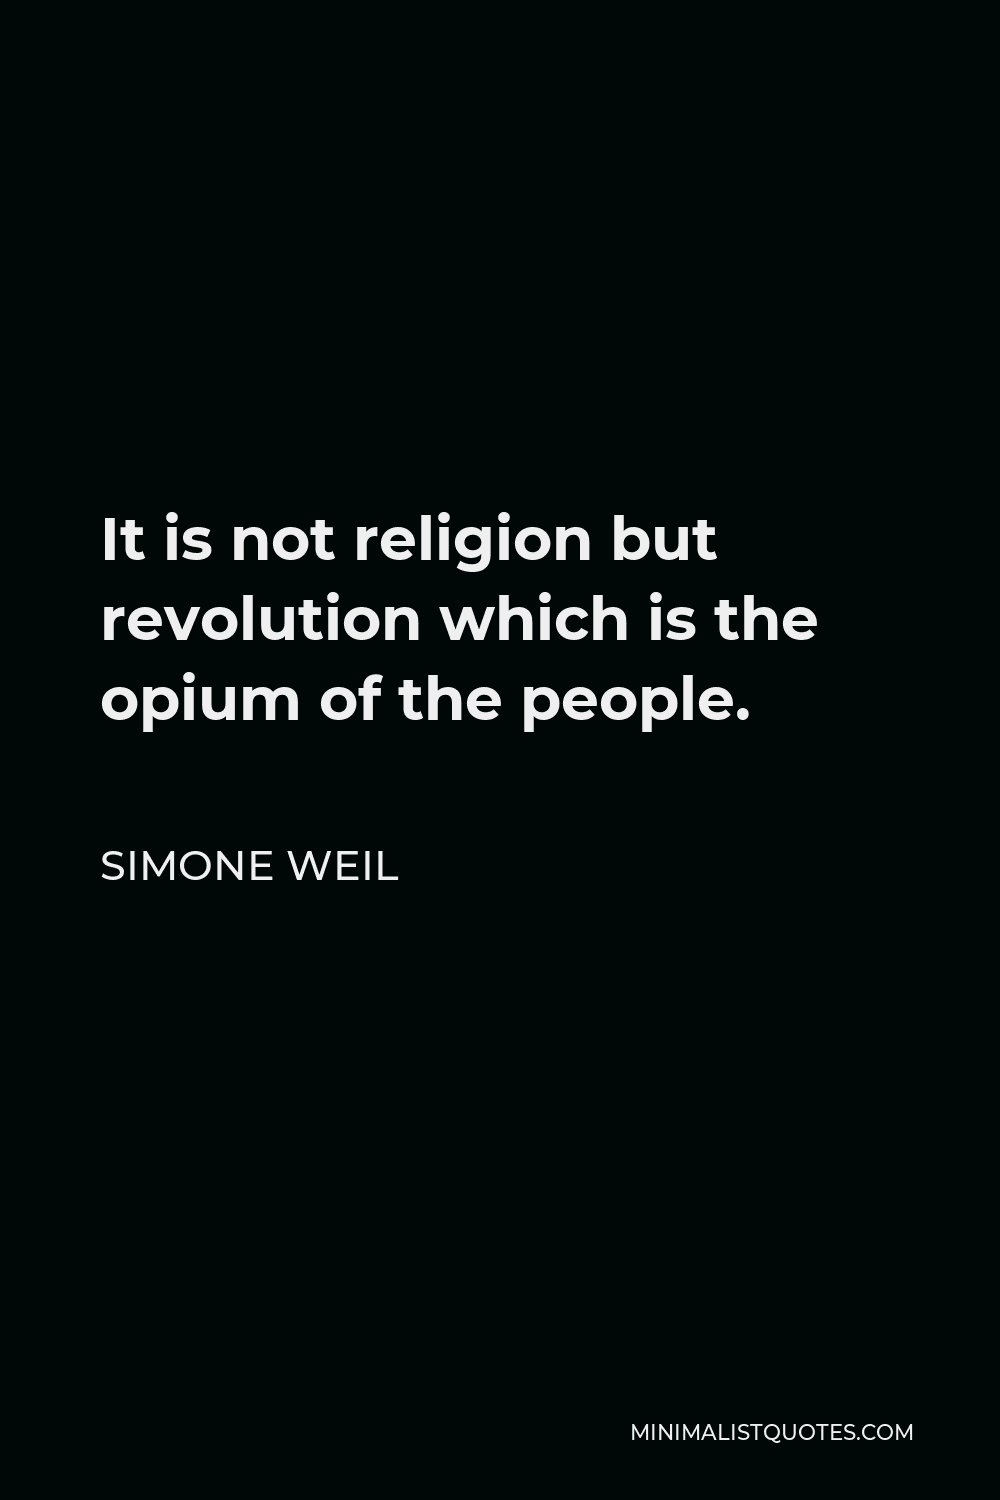 Simone Weil Quote - It is not religion but revolution which is the opium of the people.